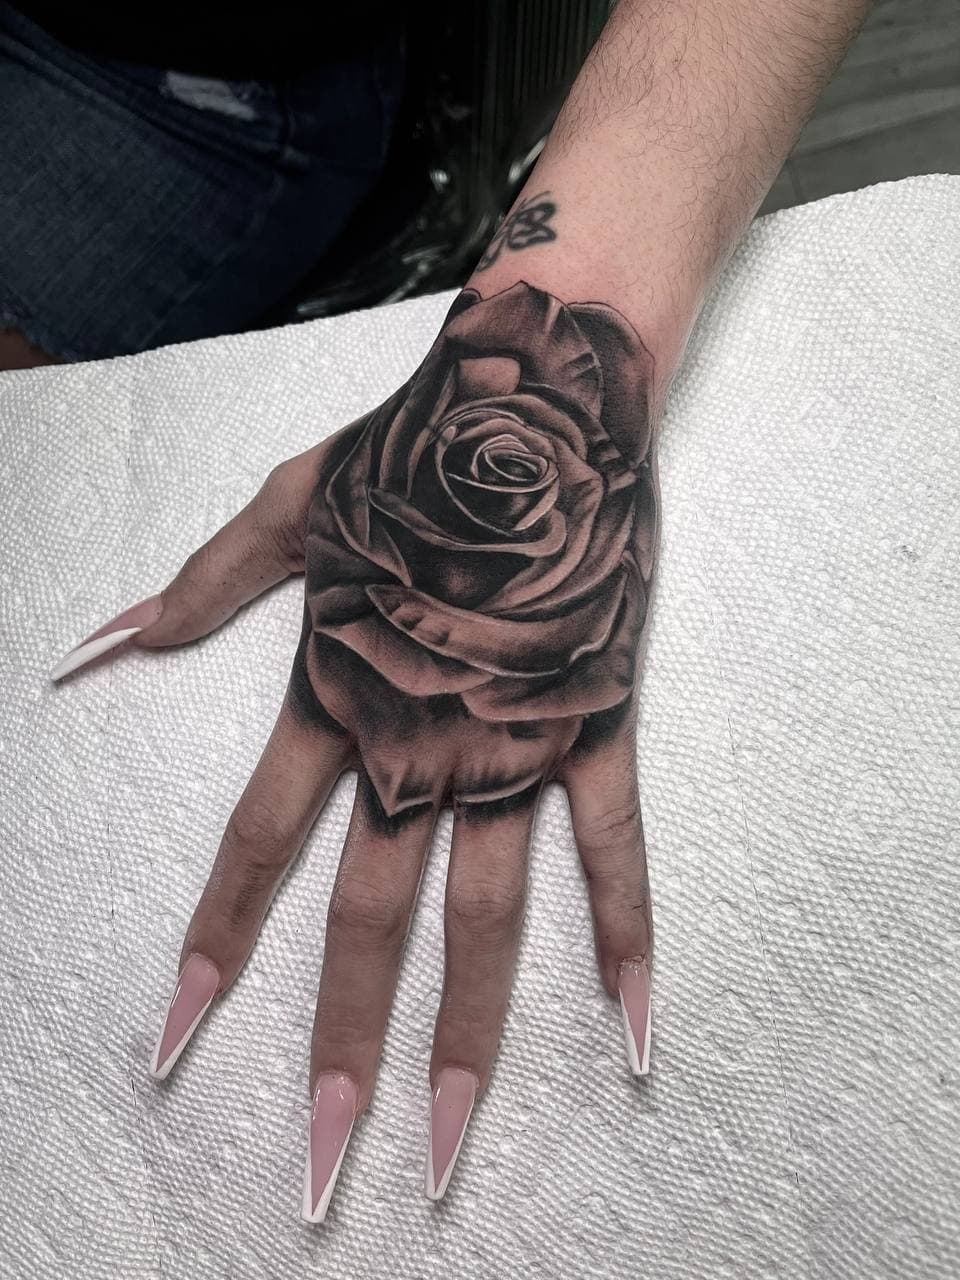 32 Hand Tattoo Ideas for Every Personality Type  Hand tattoos for girls  Hand and finger tattoos Small hand tattoos